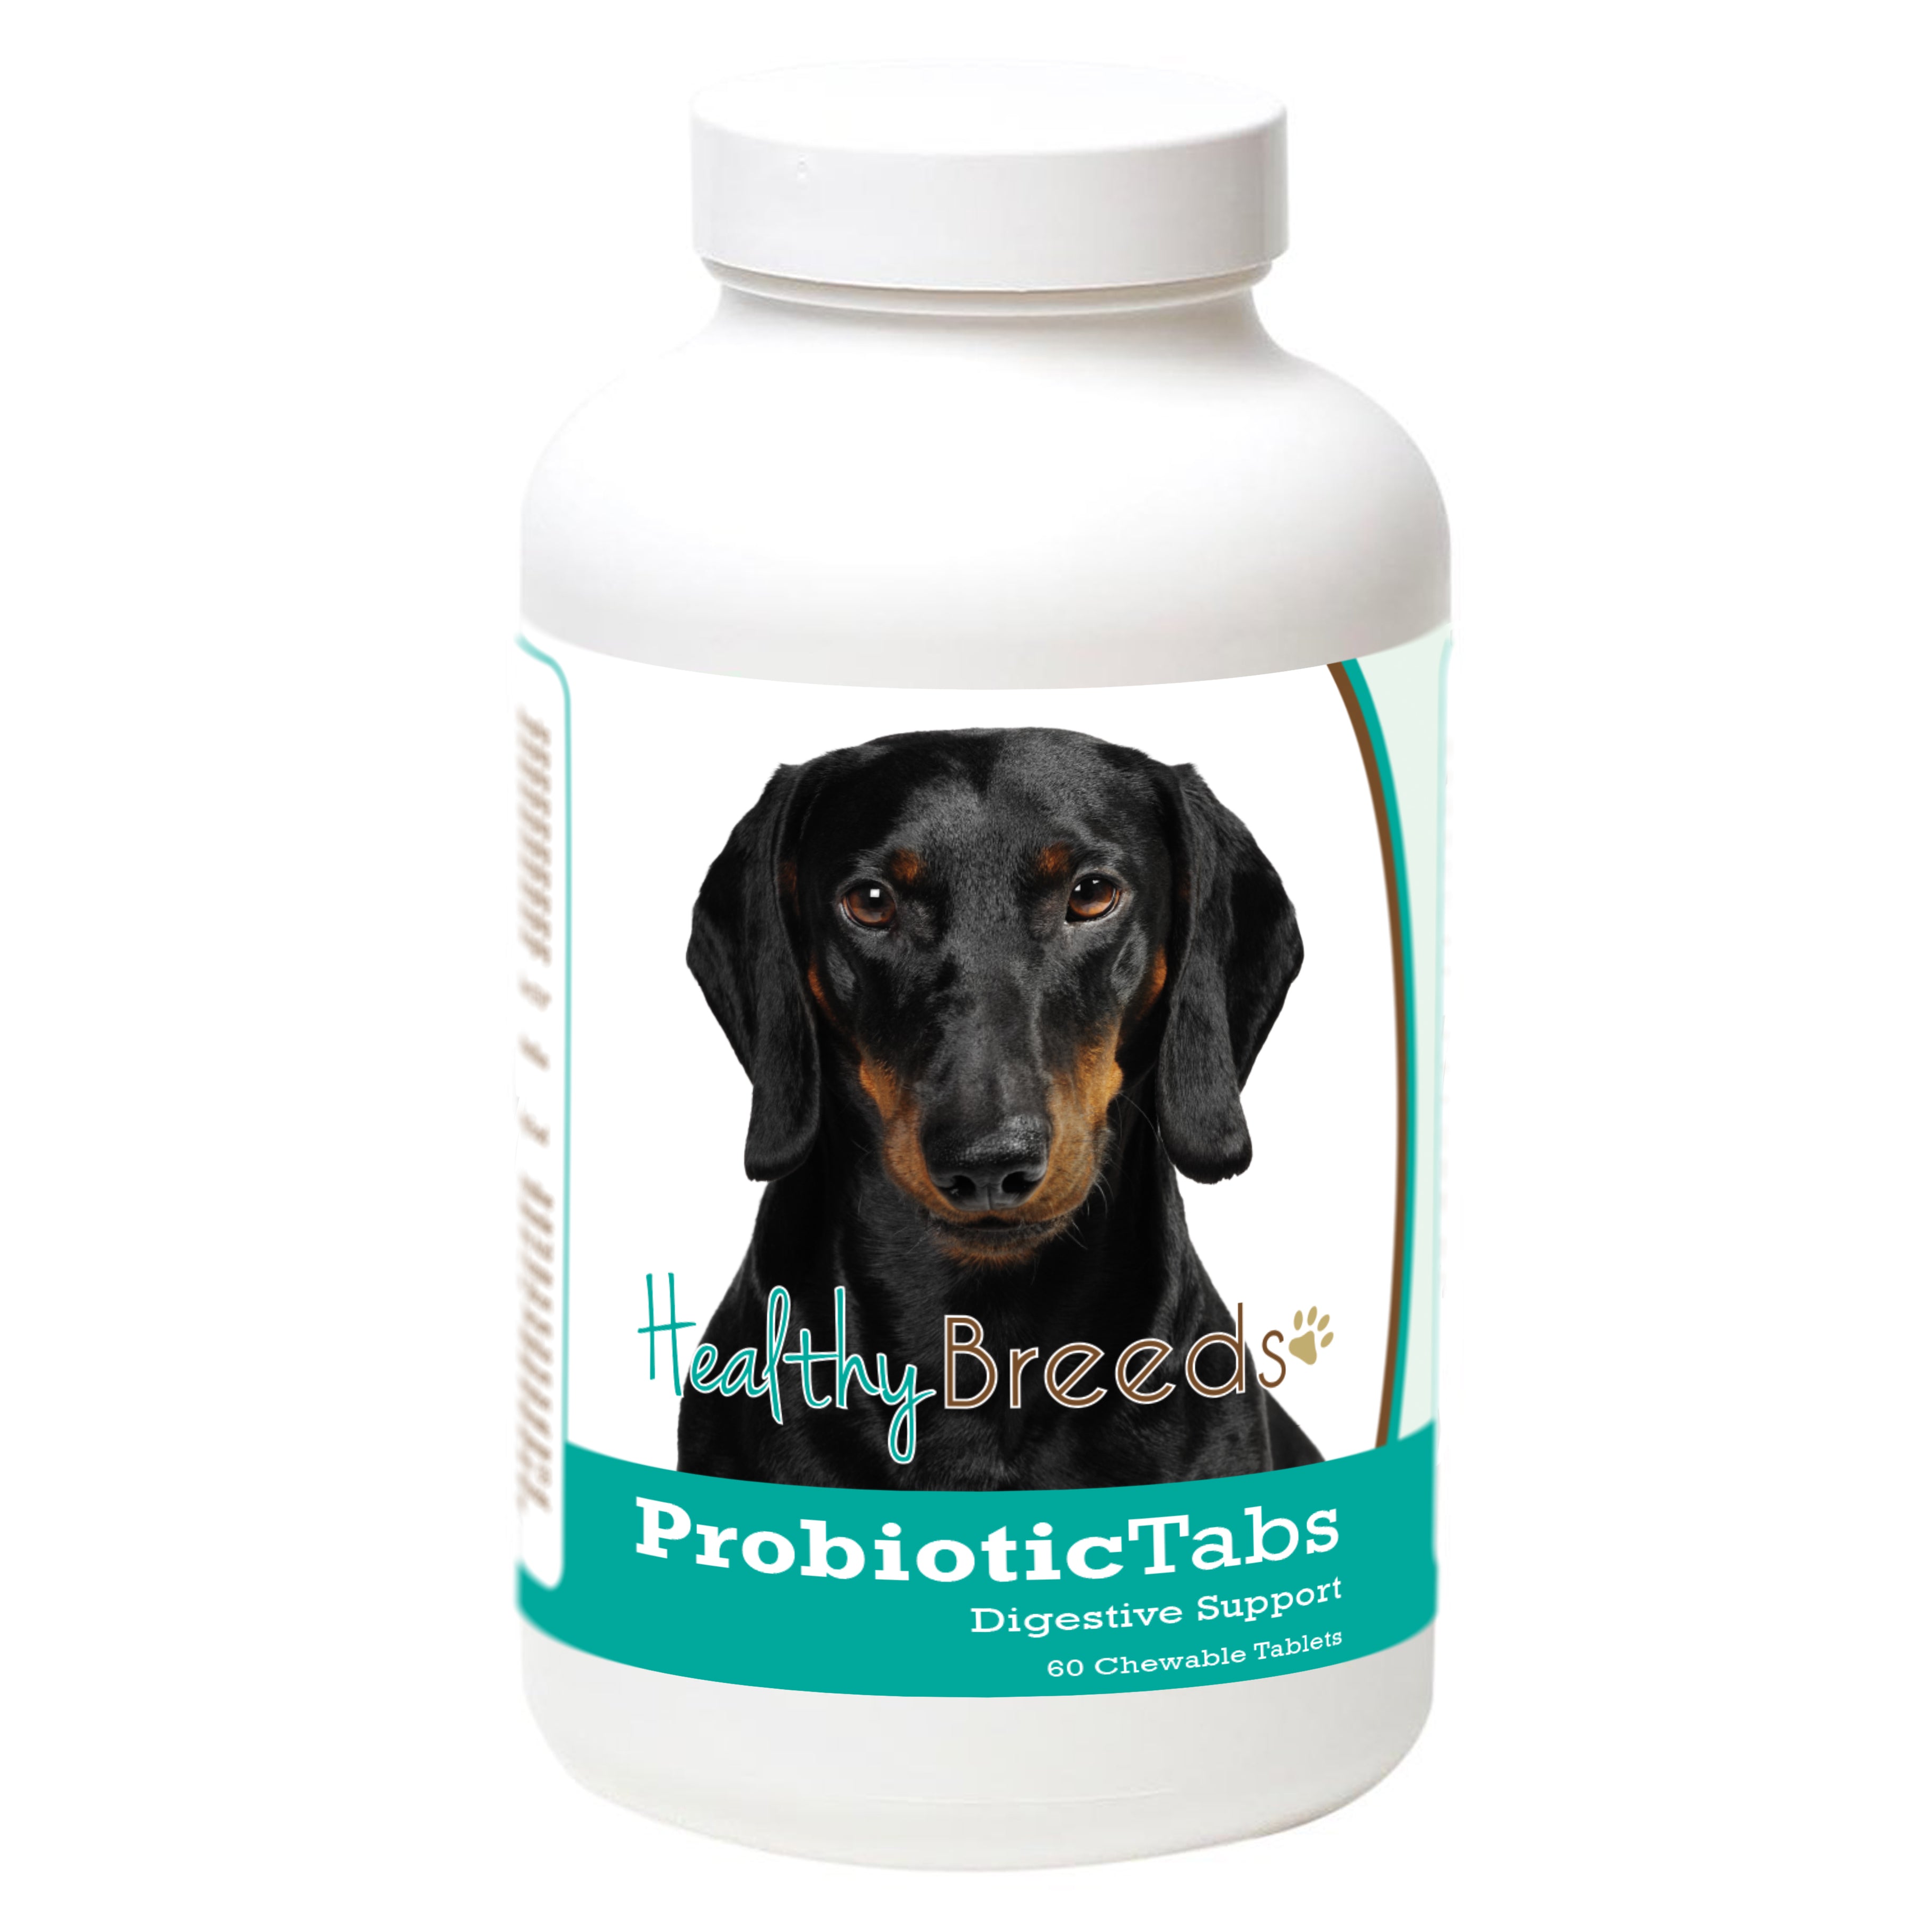 Dachshund Probiotic and Digestive Support for Dogs 60 Count